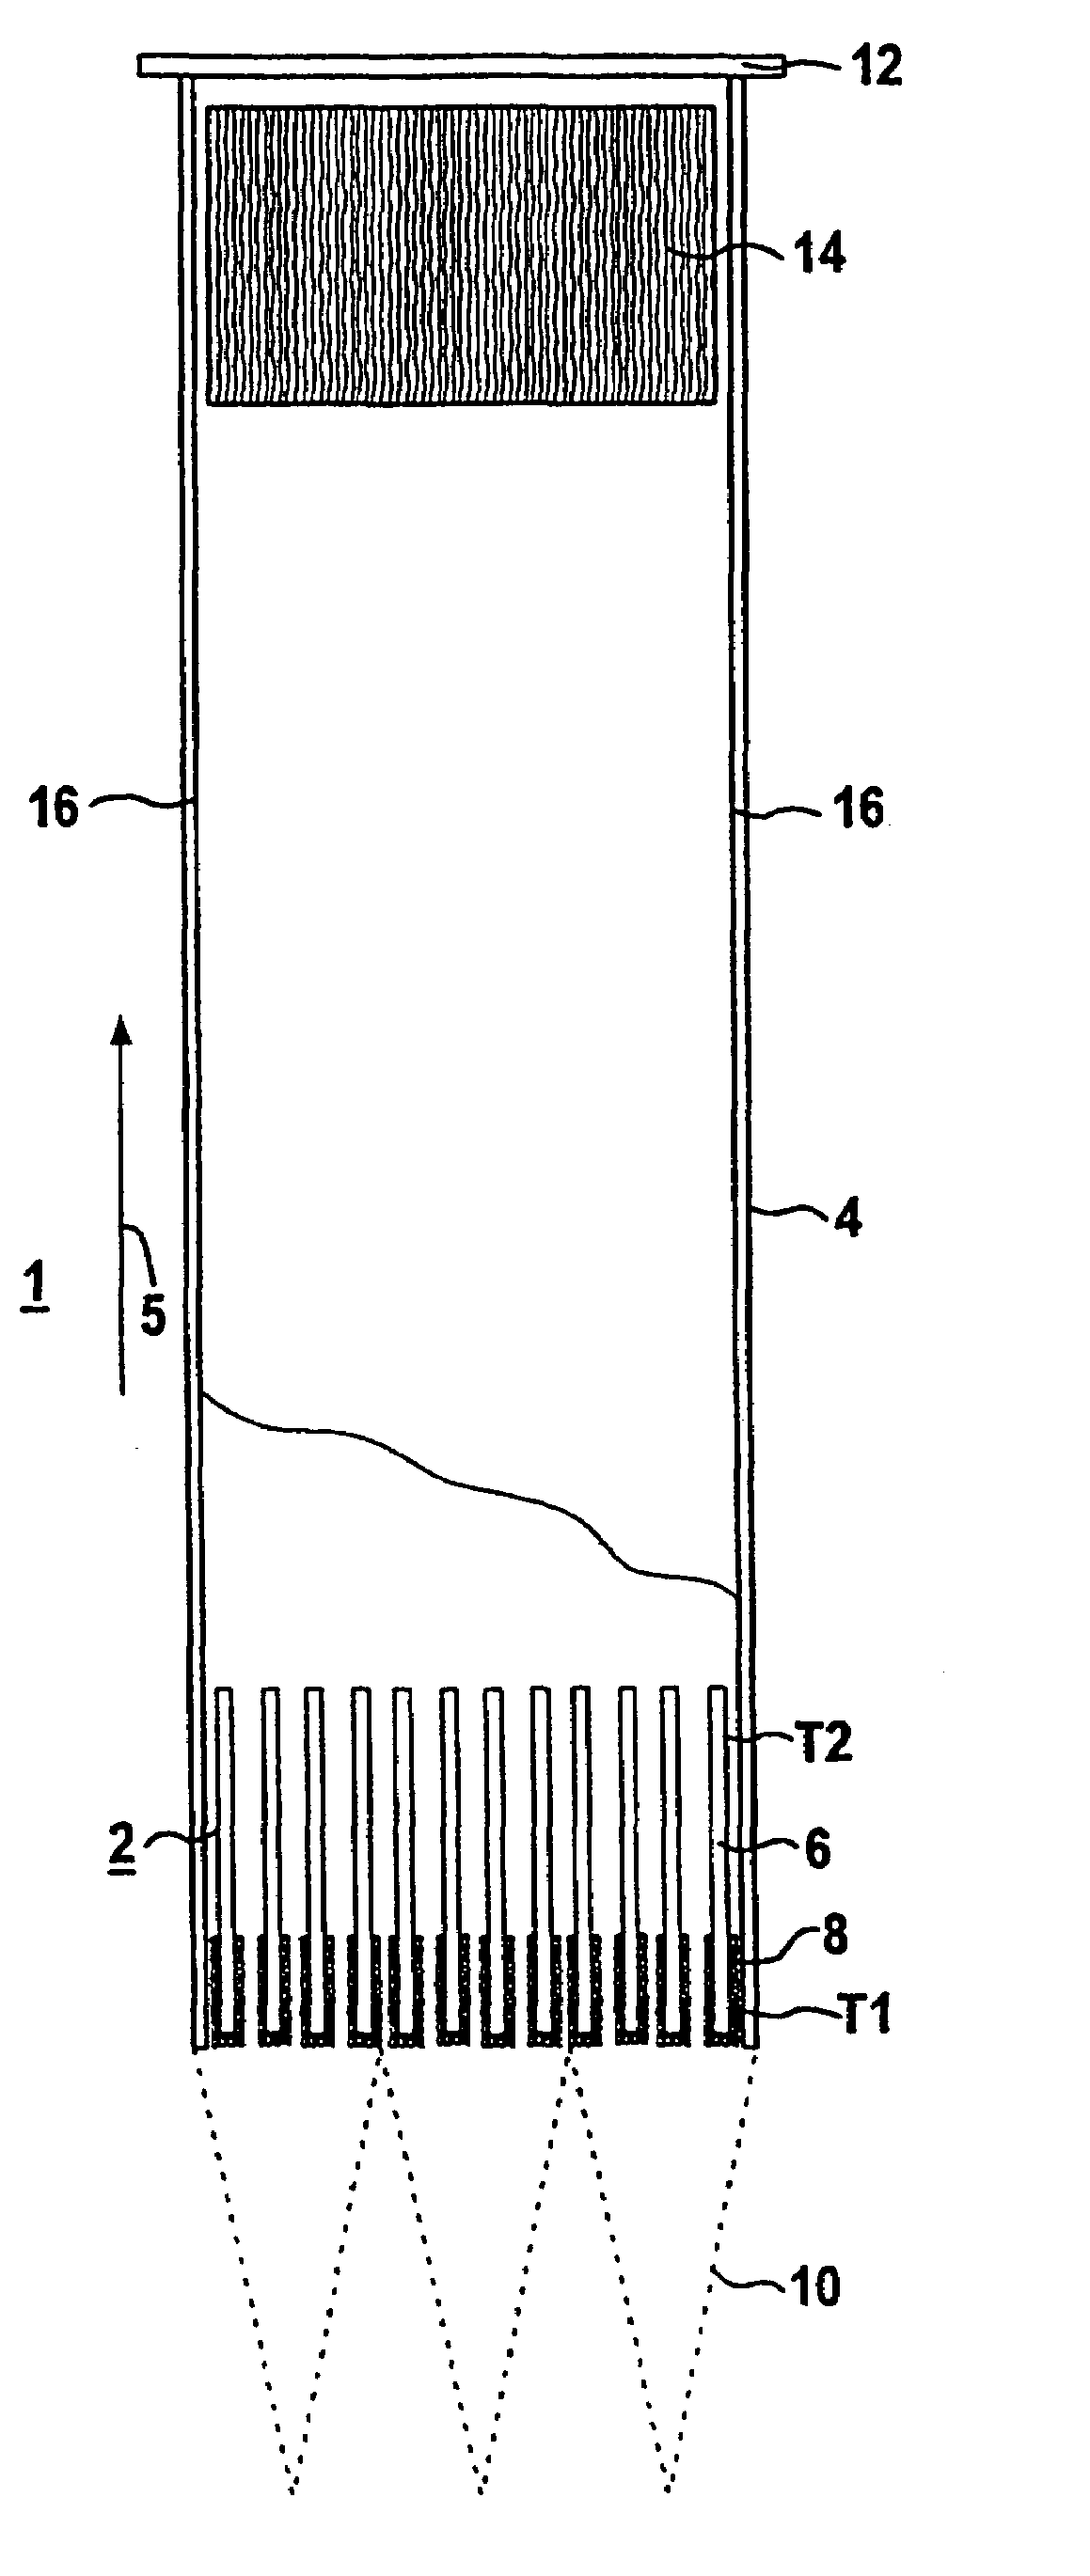 Recombination device and method for catalytically recombining hydrogen and/or carbon monoxide with oxygen in a gaseous mixture